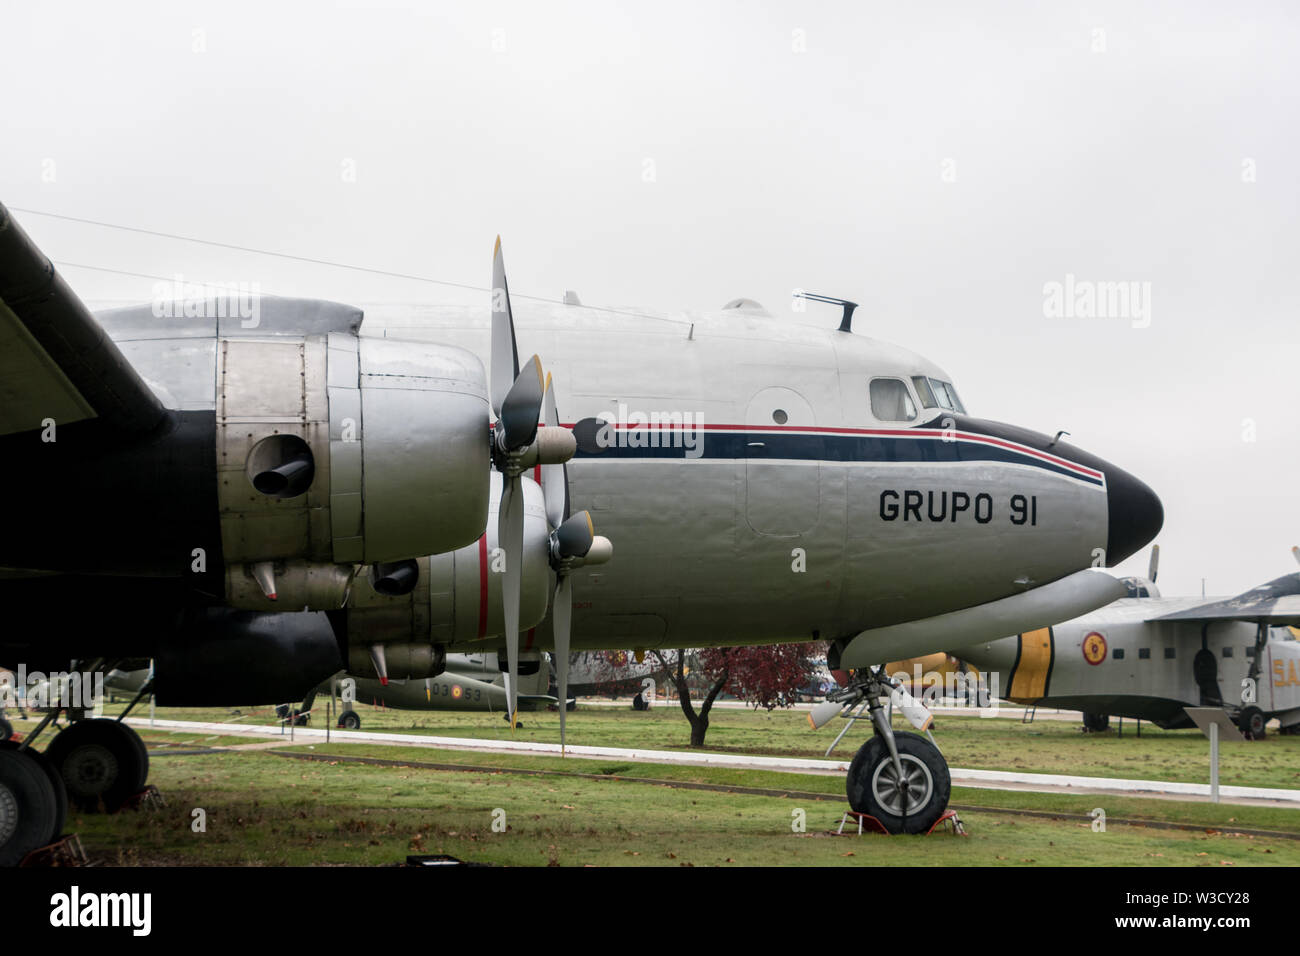 A Spanish Air Force C-54 Skymaster at the Museo de Aire Madrid, Spain Stock Photo